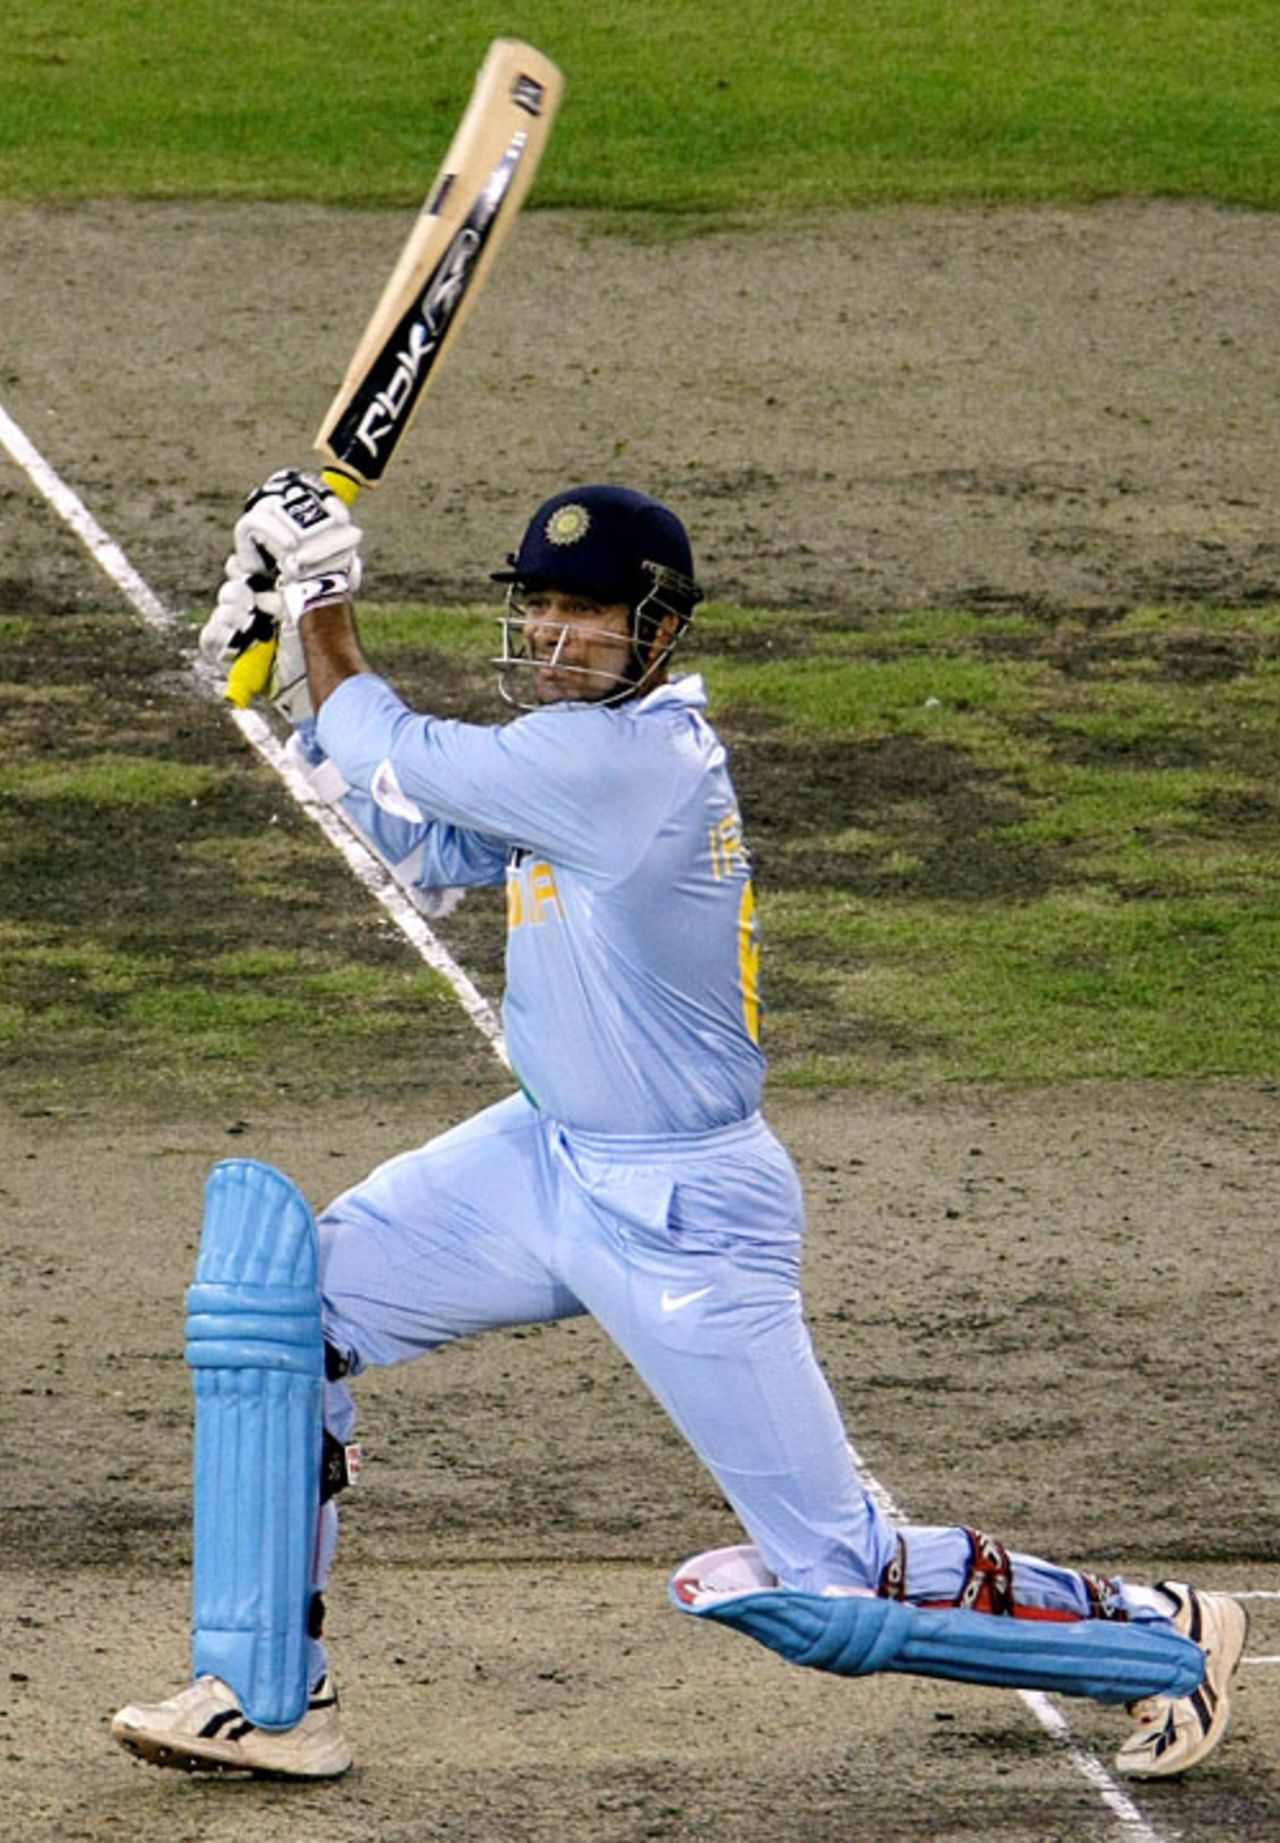 Irfan Pathan's 26 was the only score in double figures for India, Australia v India, Twenty20 international, Melbourne, February 1, 2008